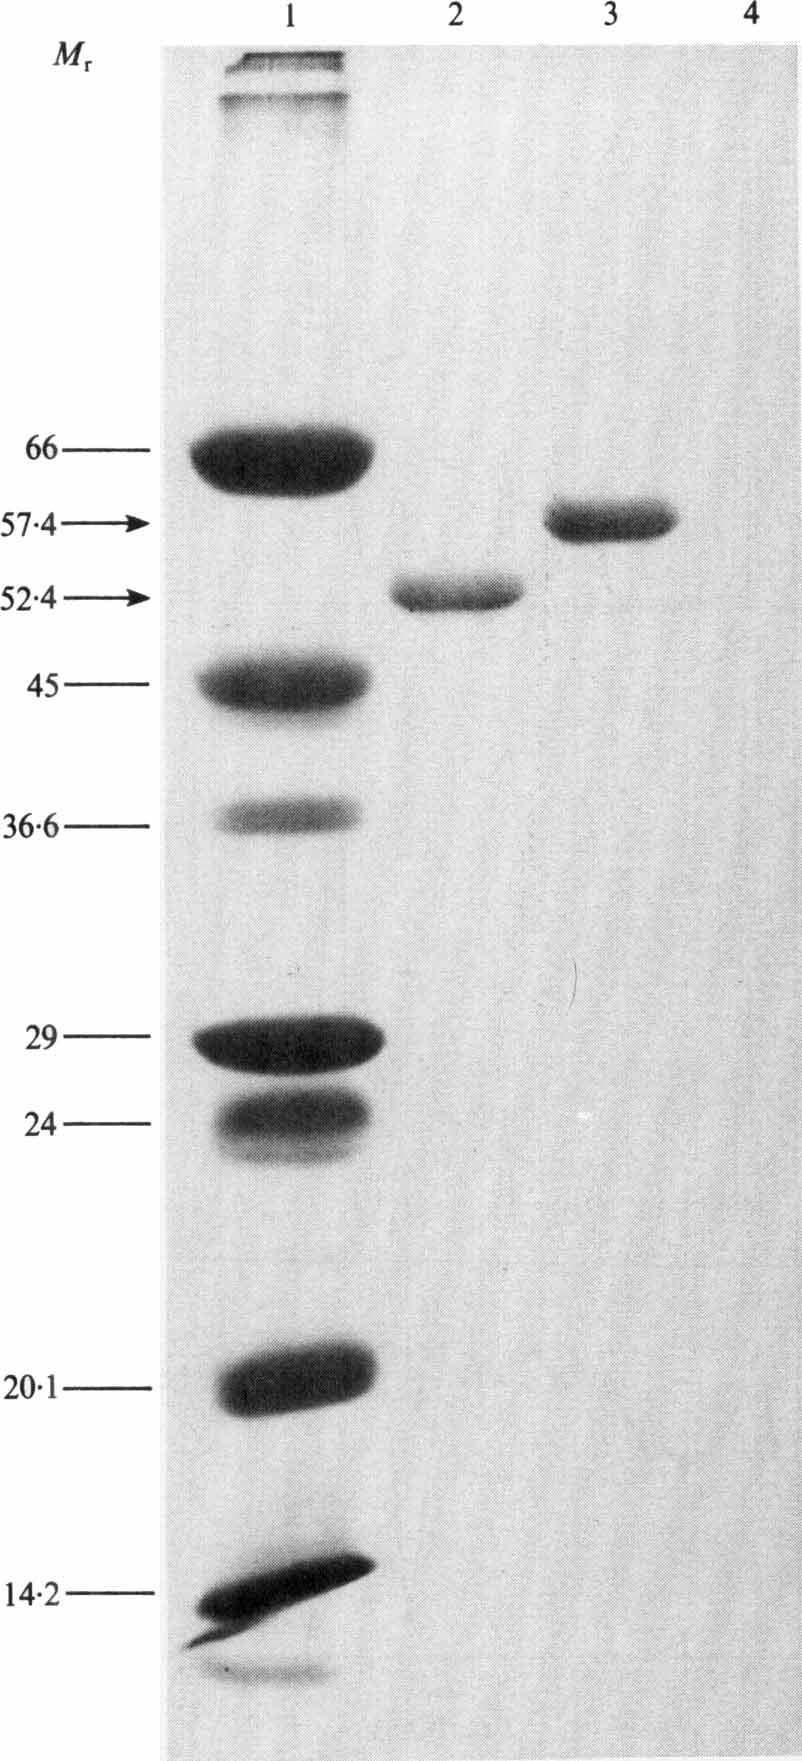 Inactivation of a-i-at by Legionella protease 485 Fig. 2. SDS-PAGE analysis of a-1-at inactivated by reaction with L. pneumophila TDP.